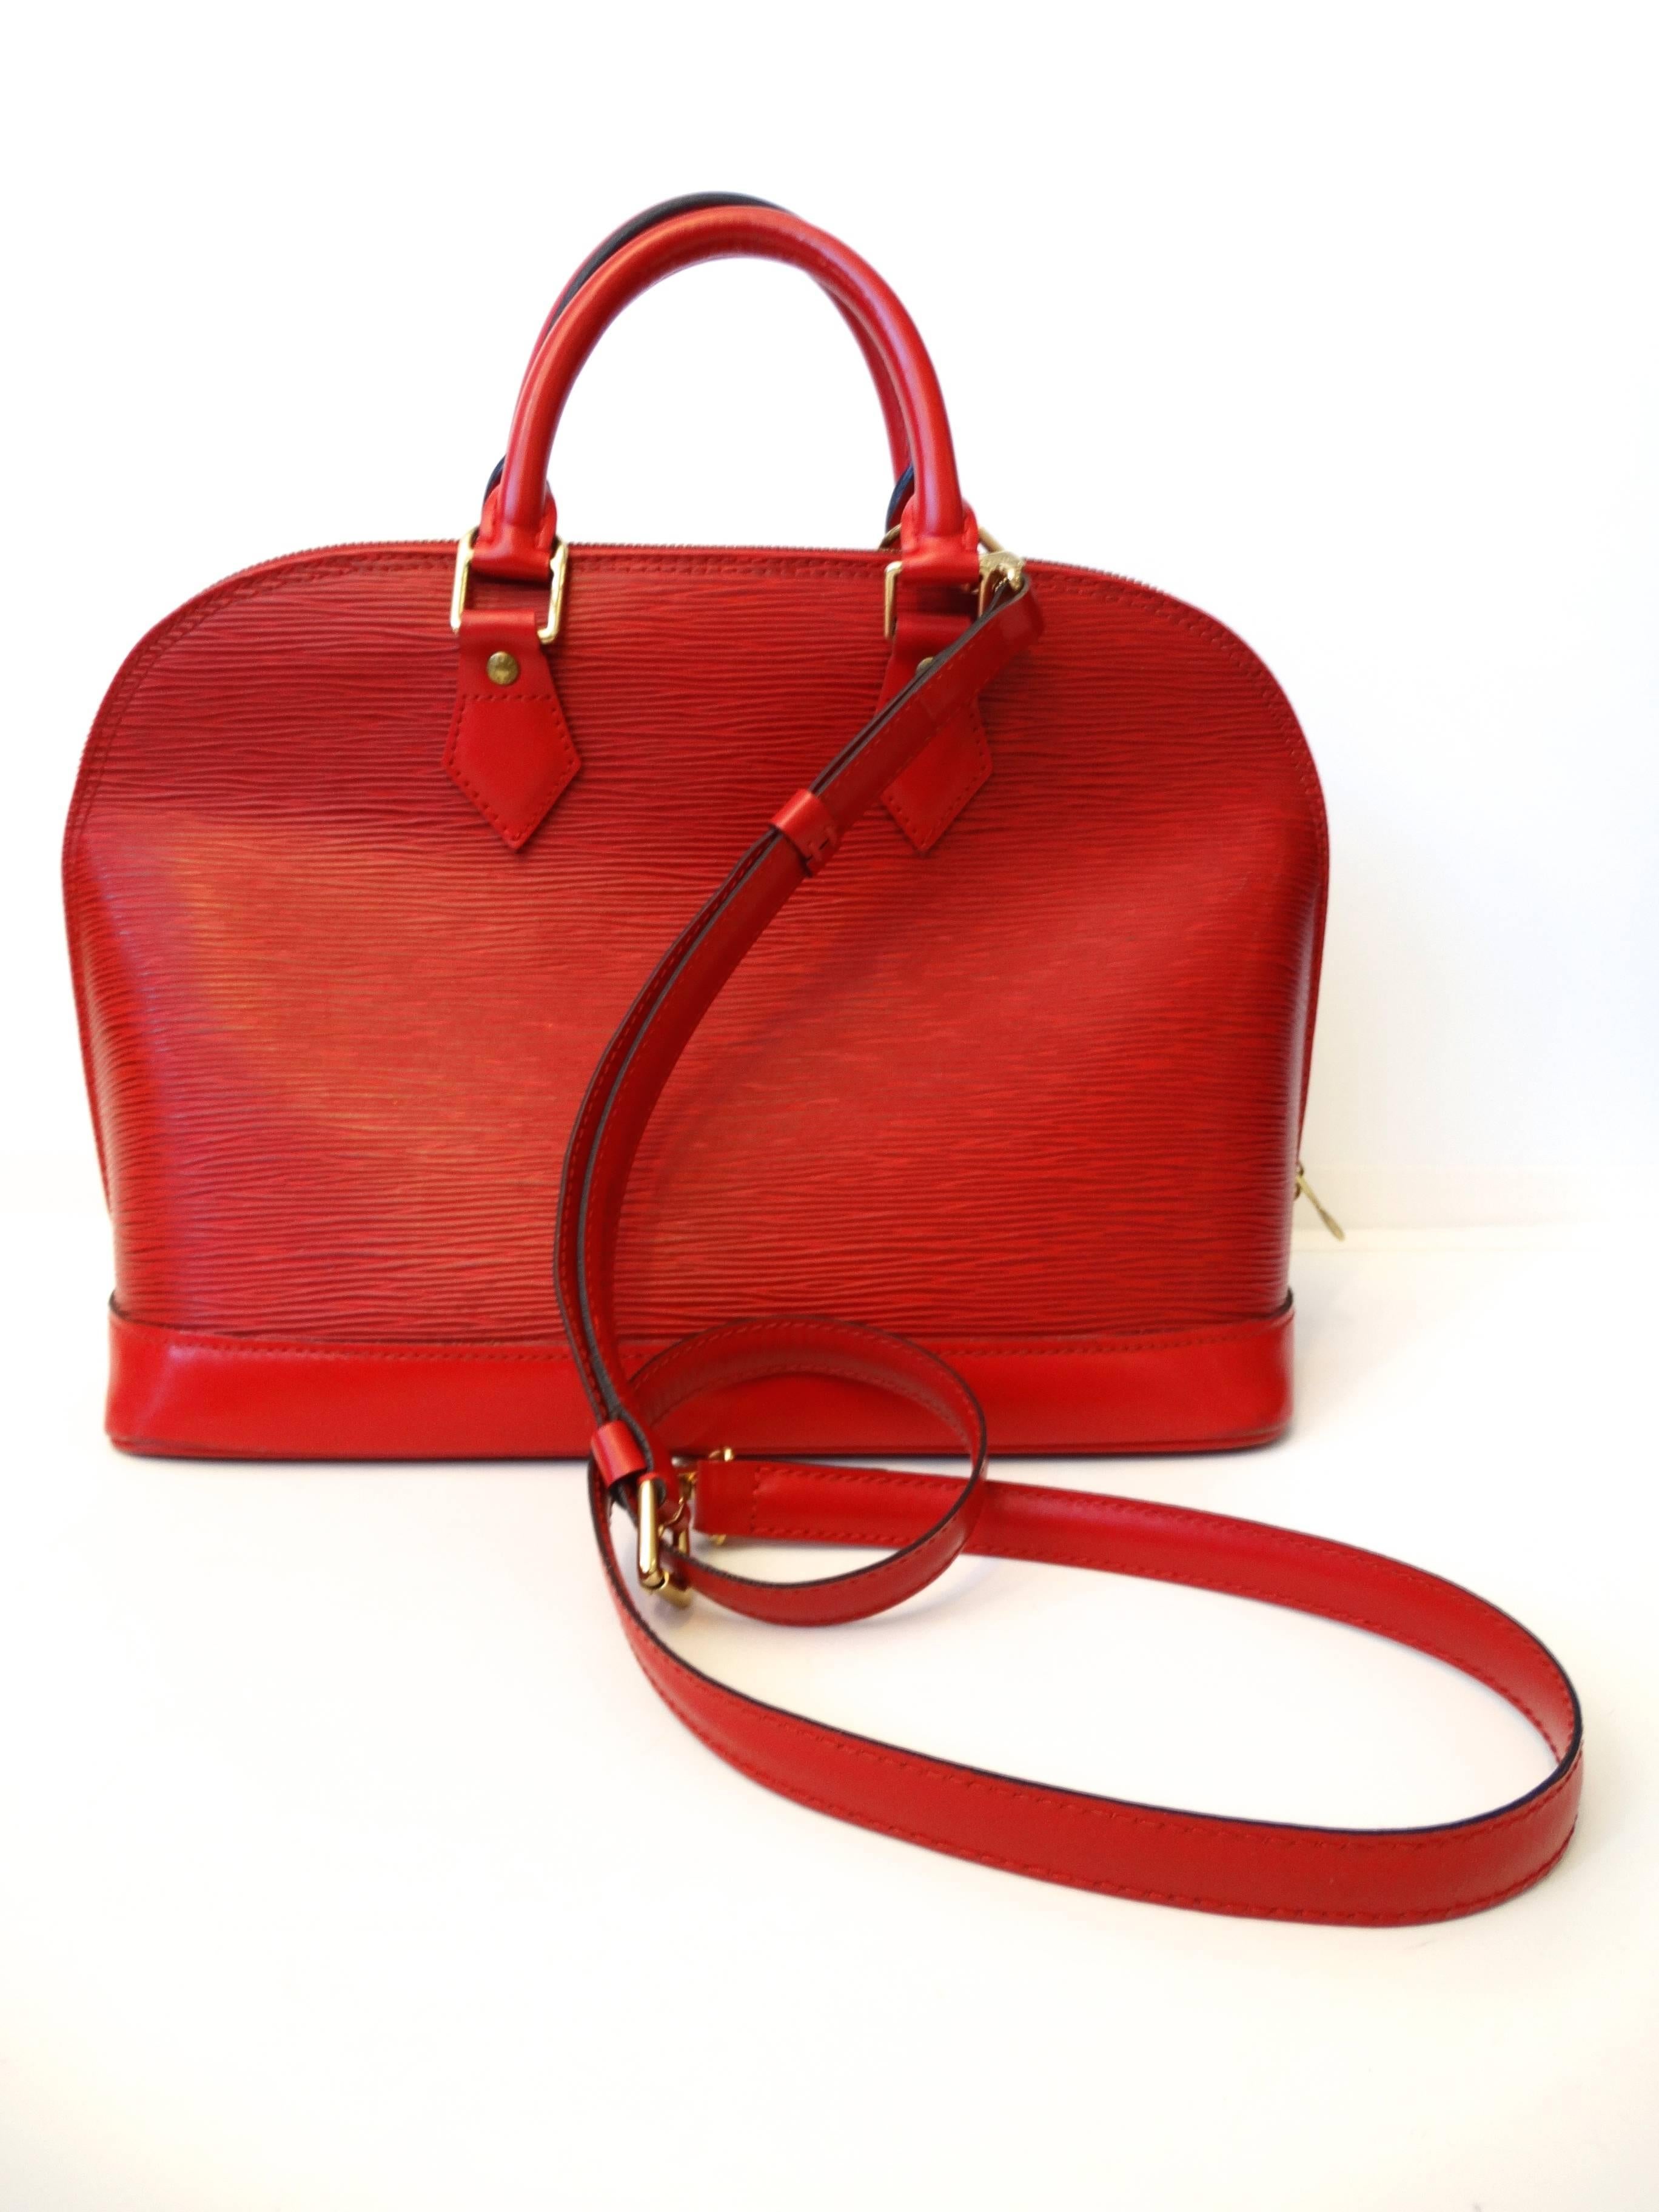 LOUIS VUITTON Vintage Epi Alma PM in Castilian Red. This is a stunning bowler style tote that is created out of Louis Vuitton signature textured epi leather in red. The bag features strong cowhide rolled leather handles and trim with brass hardware